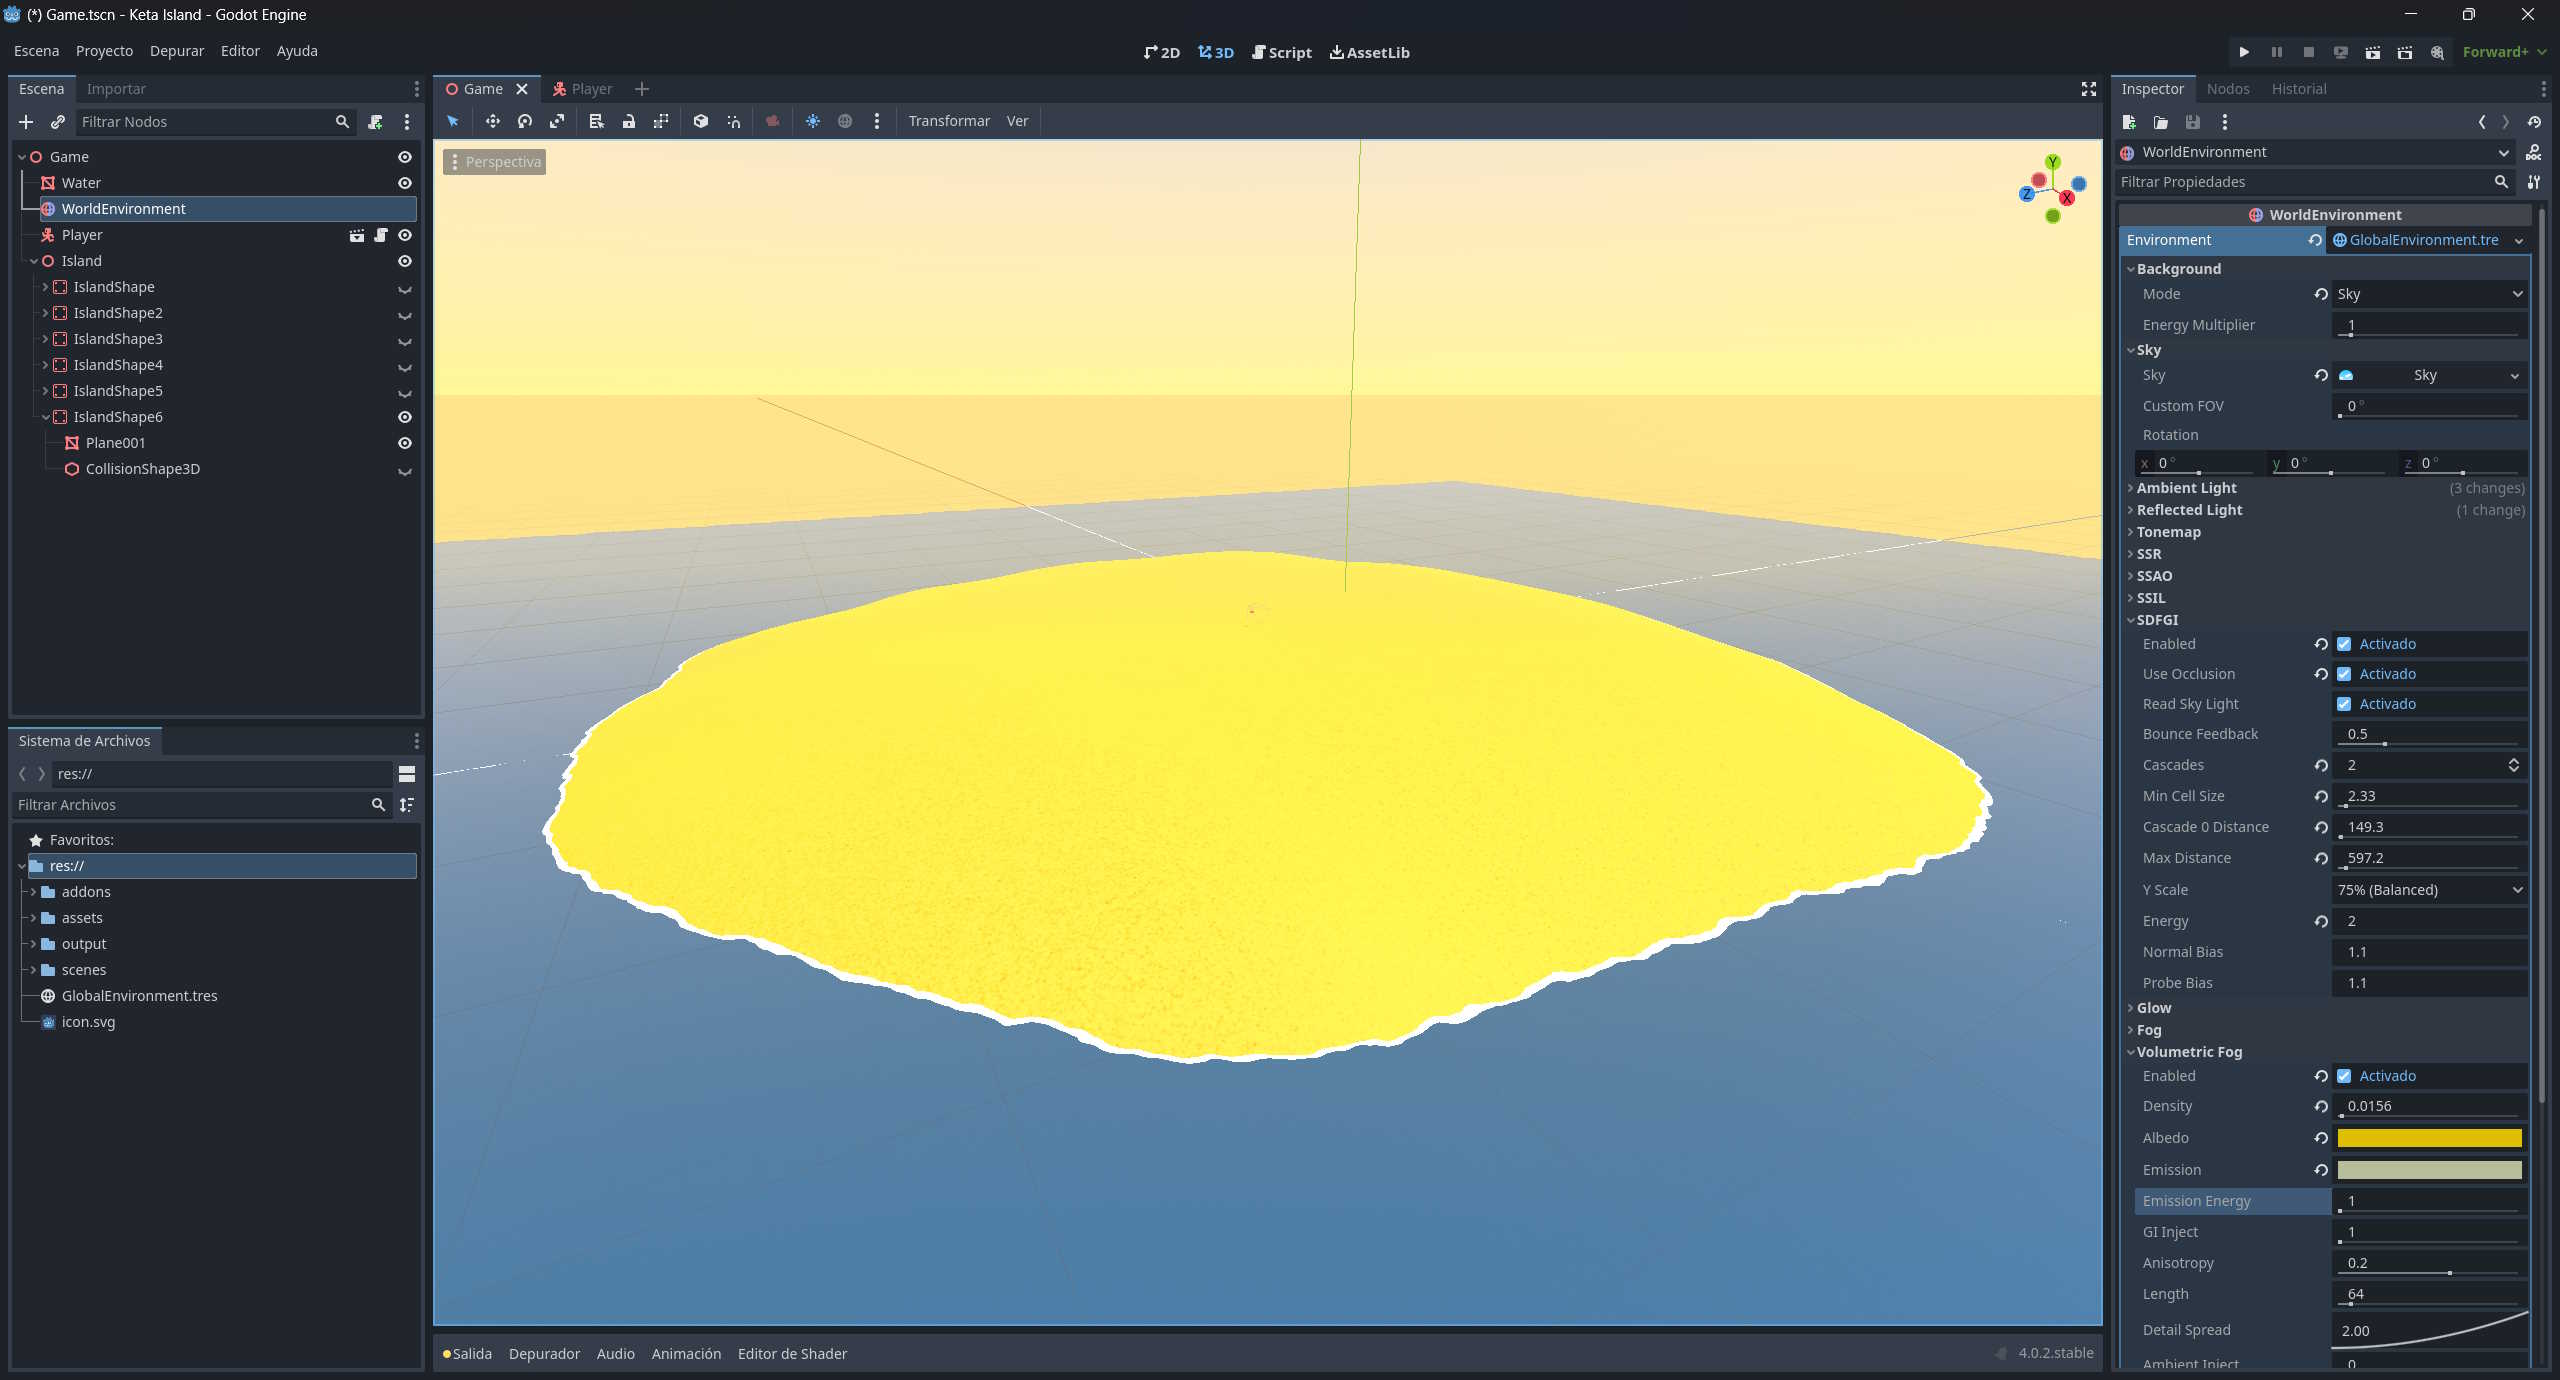 Godot Engine screenshot, showing a sandy yellow 3D island in the sea.